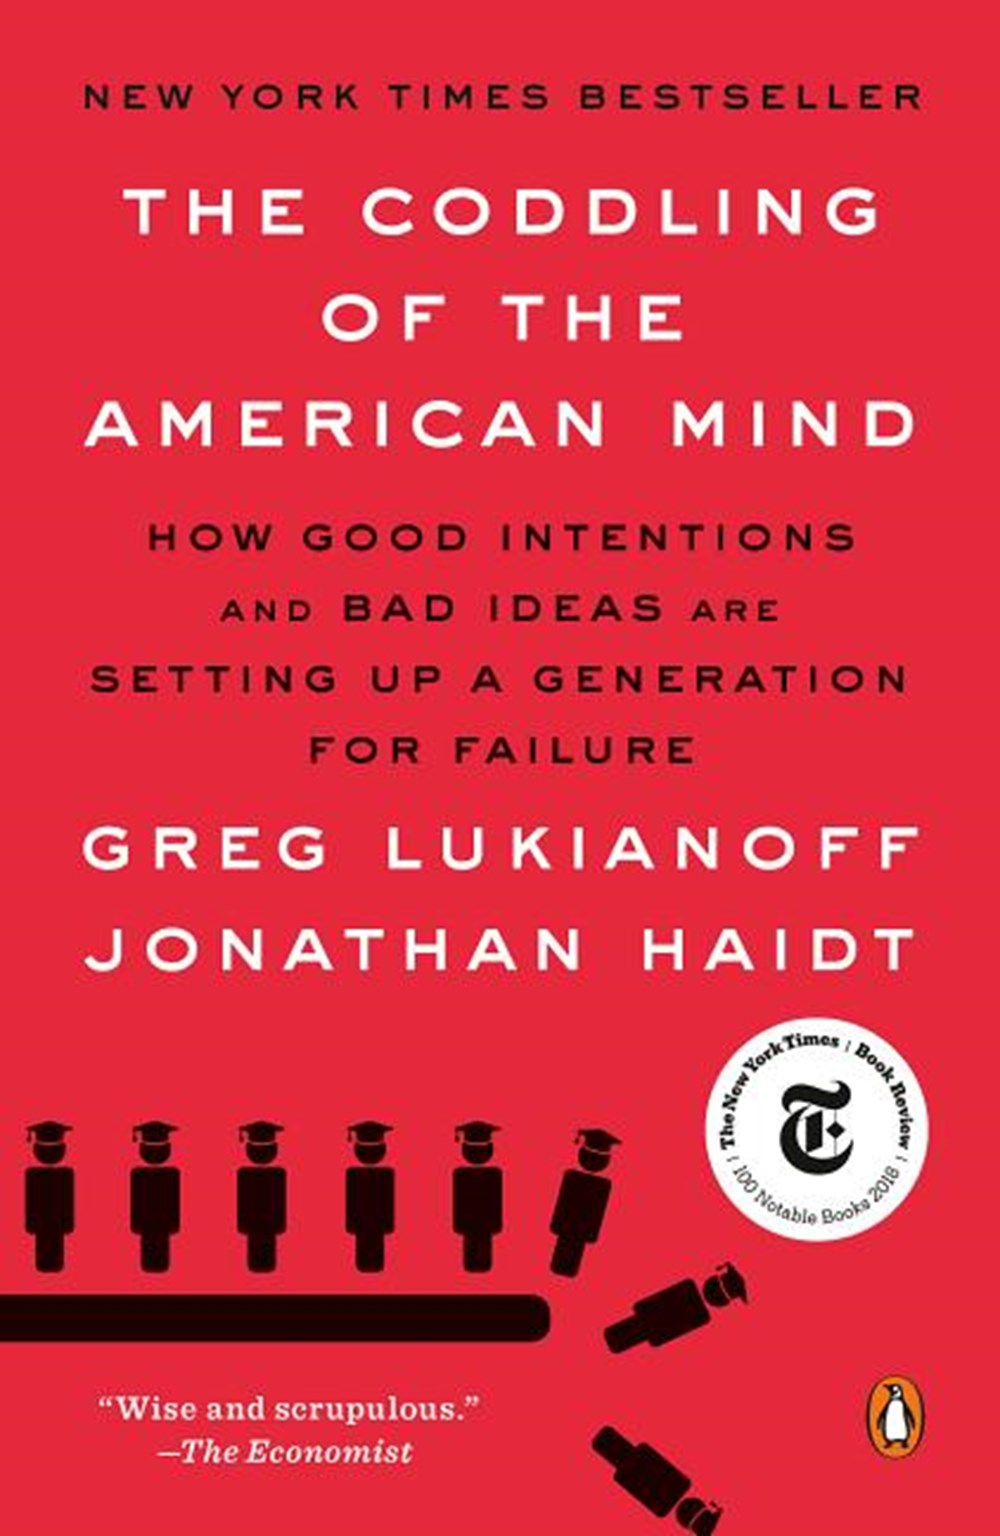 Coddling of the American Mind: How Good Intentions and Bad Ideas Are Setting Up a Generation for Fai